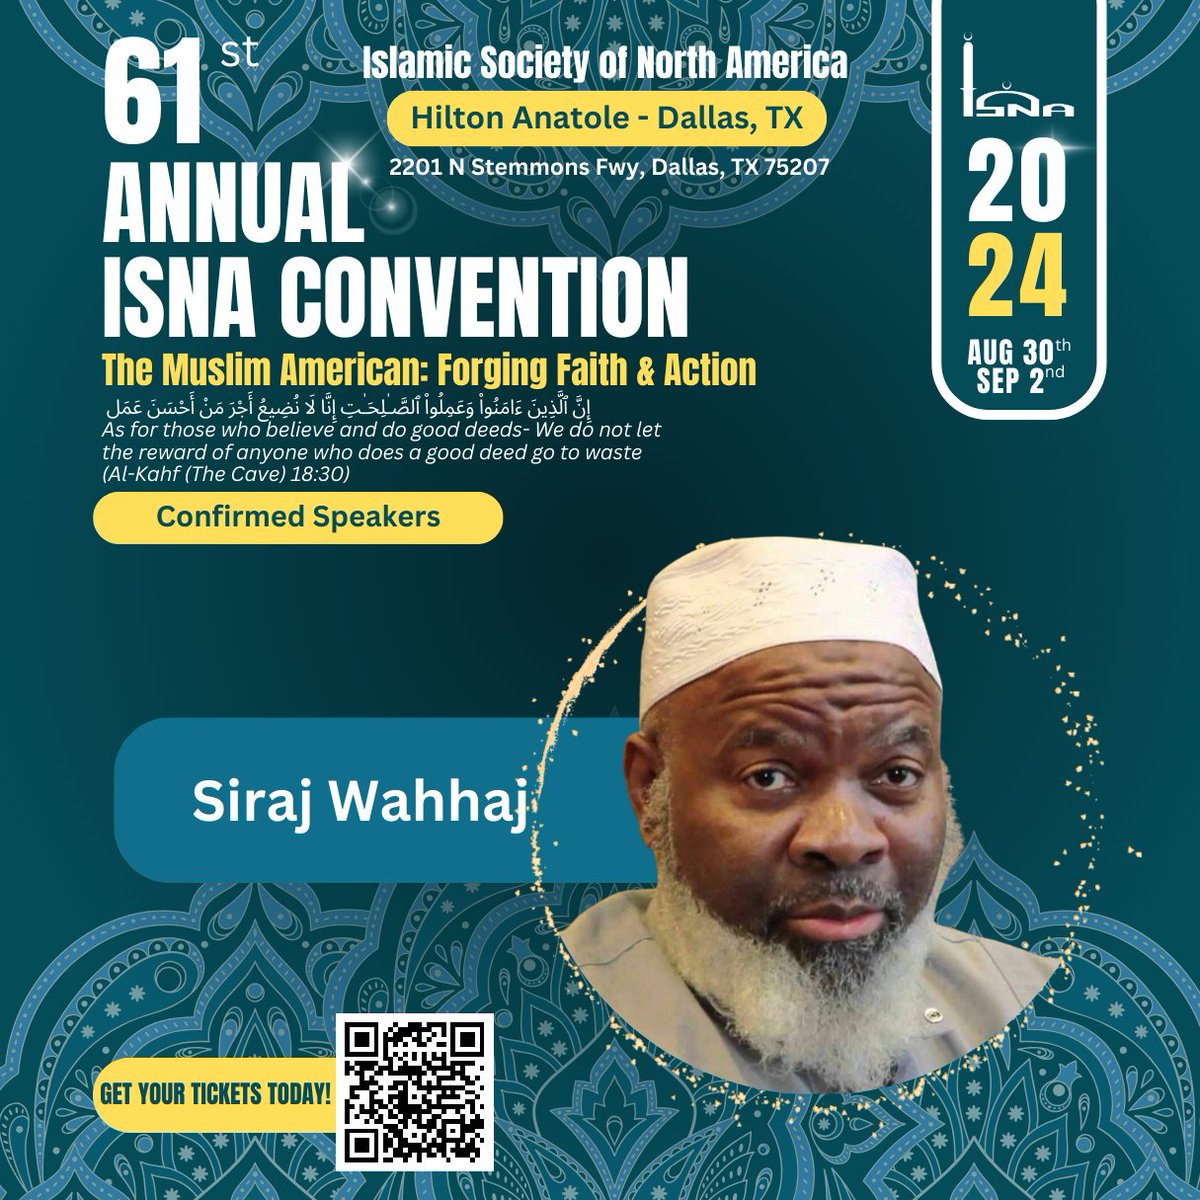 Siraj Wahhaj is a confirmed speaker for ISNA's 61st Annual Convention in Dallas, TX this year!

Get your tickets at isna.net/convention/

#ISNA61 #ISNAconvention #dallas